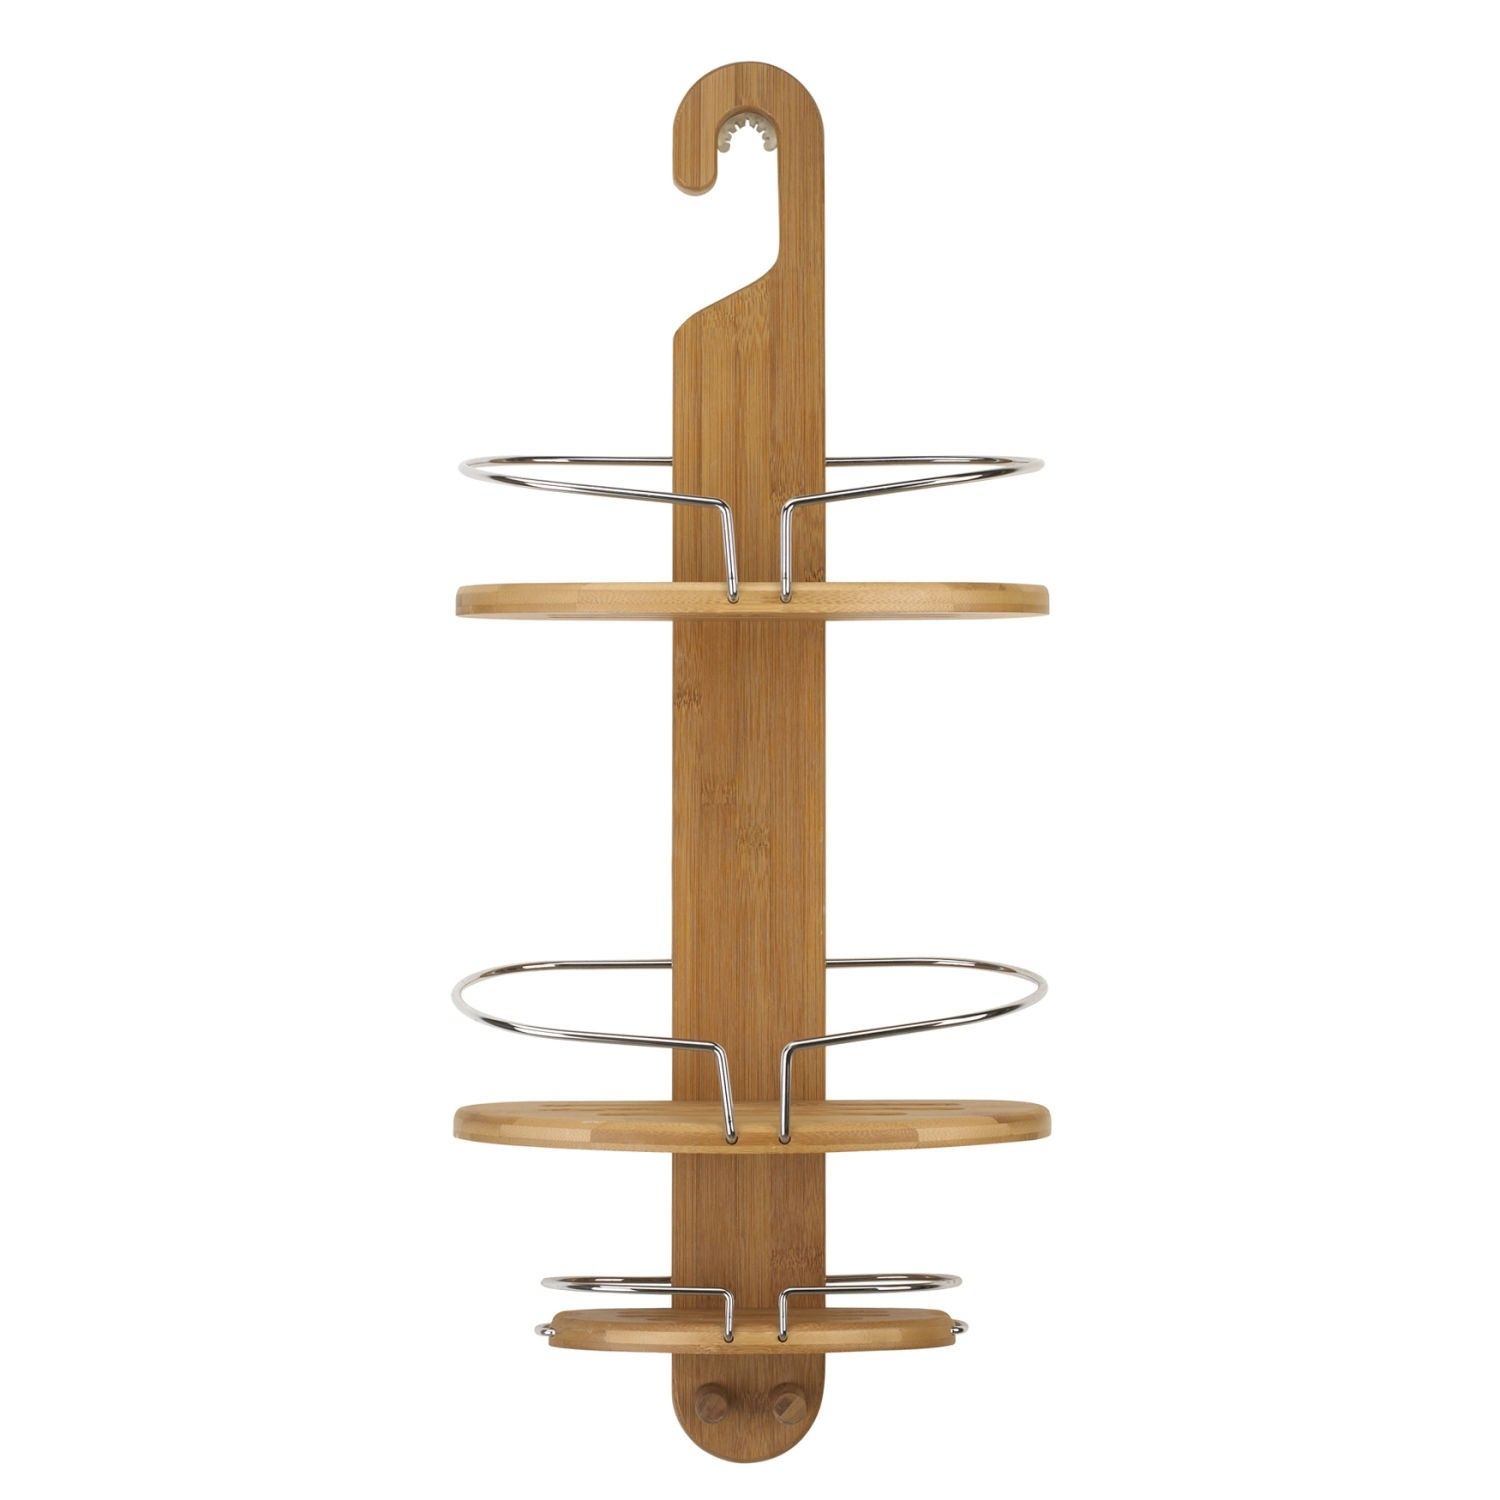 Contemporary design ideas unique target shower bath caddy with wooden